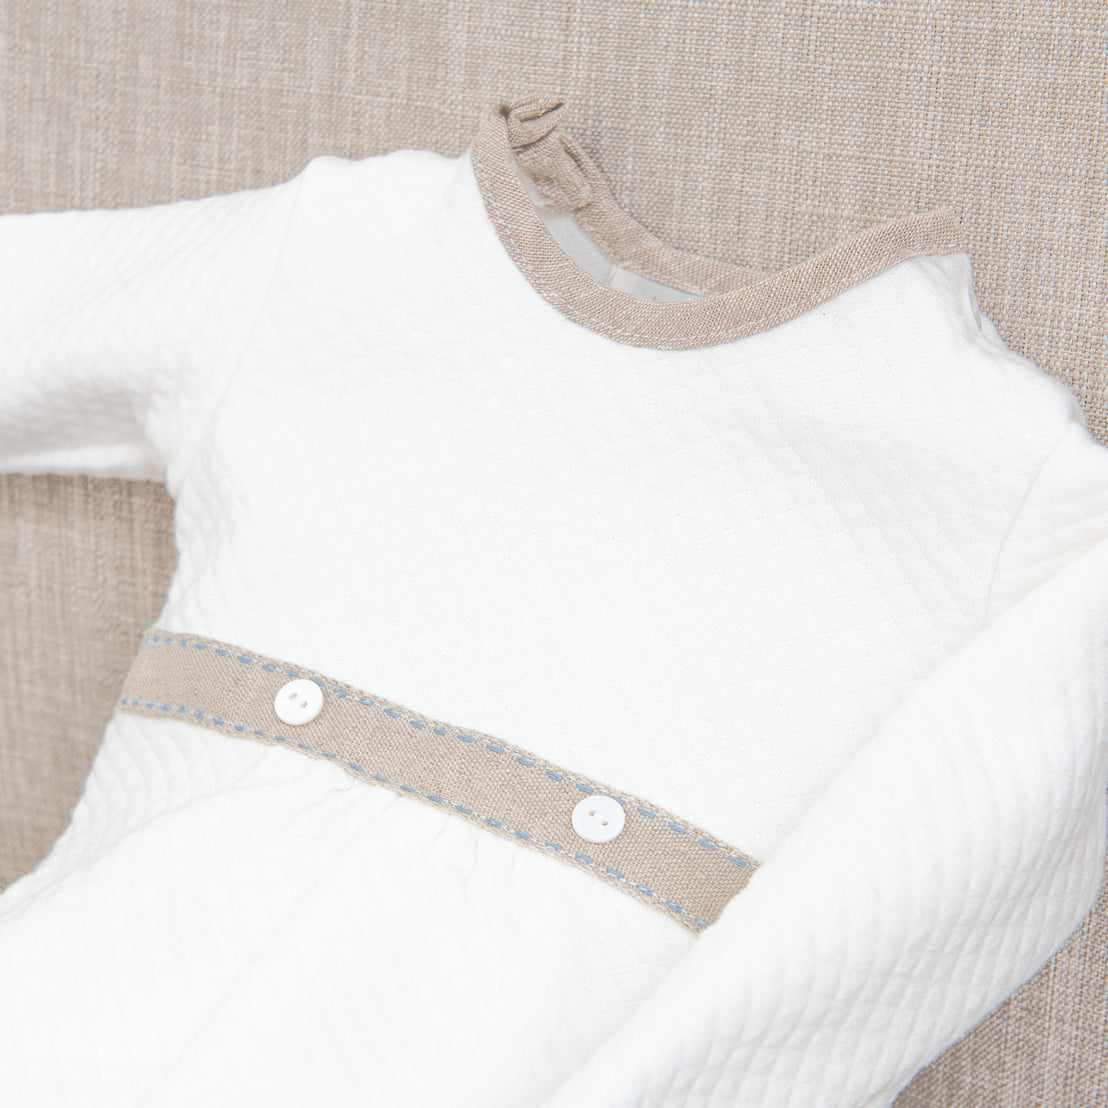 Close-up of a boutique white Austin Romper with an heirloom burlap belt and button details, displayed on a neutral fabric background.